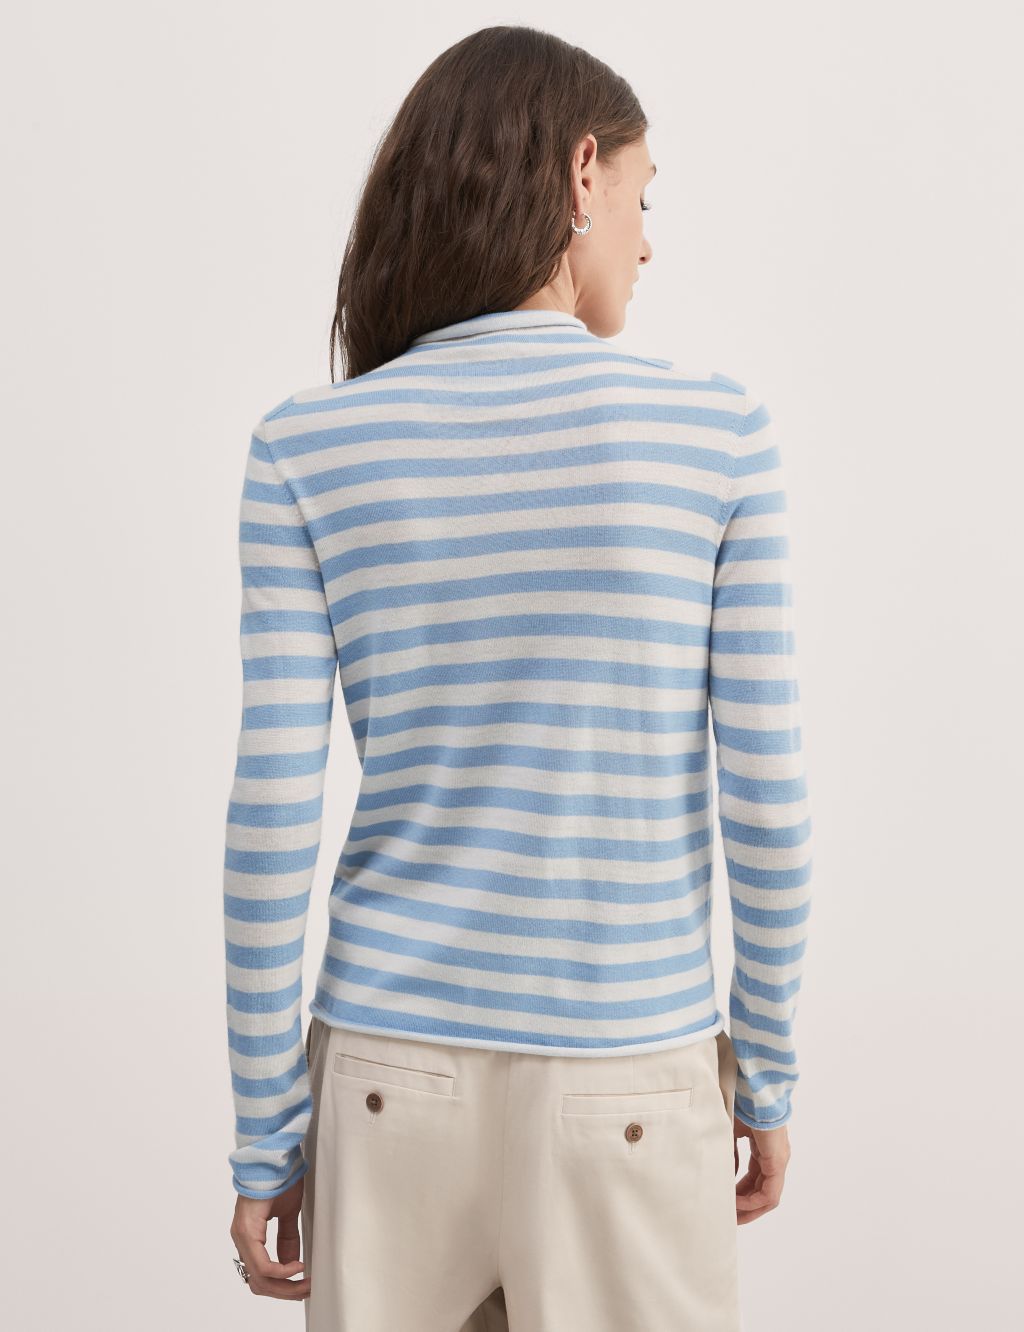 Wool Rich Striped Jumper with Cashmere image 5